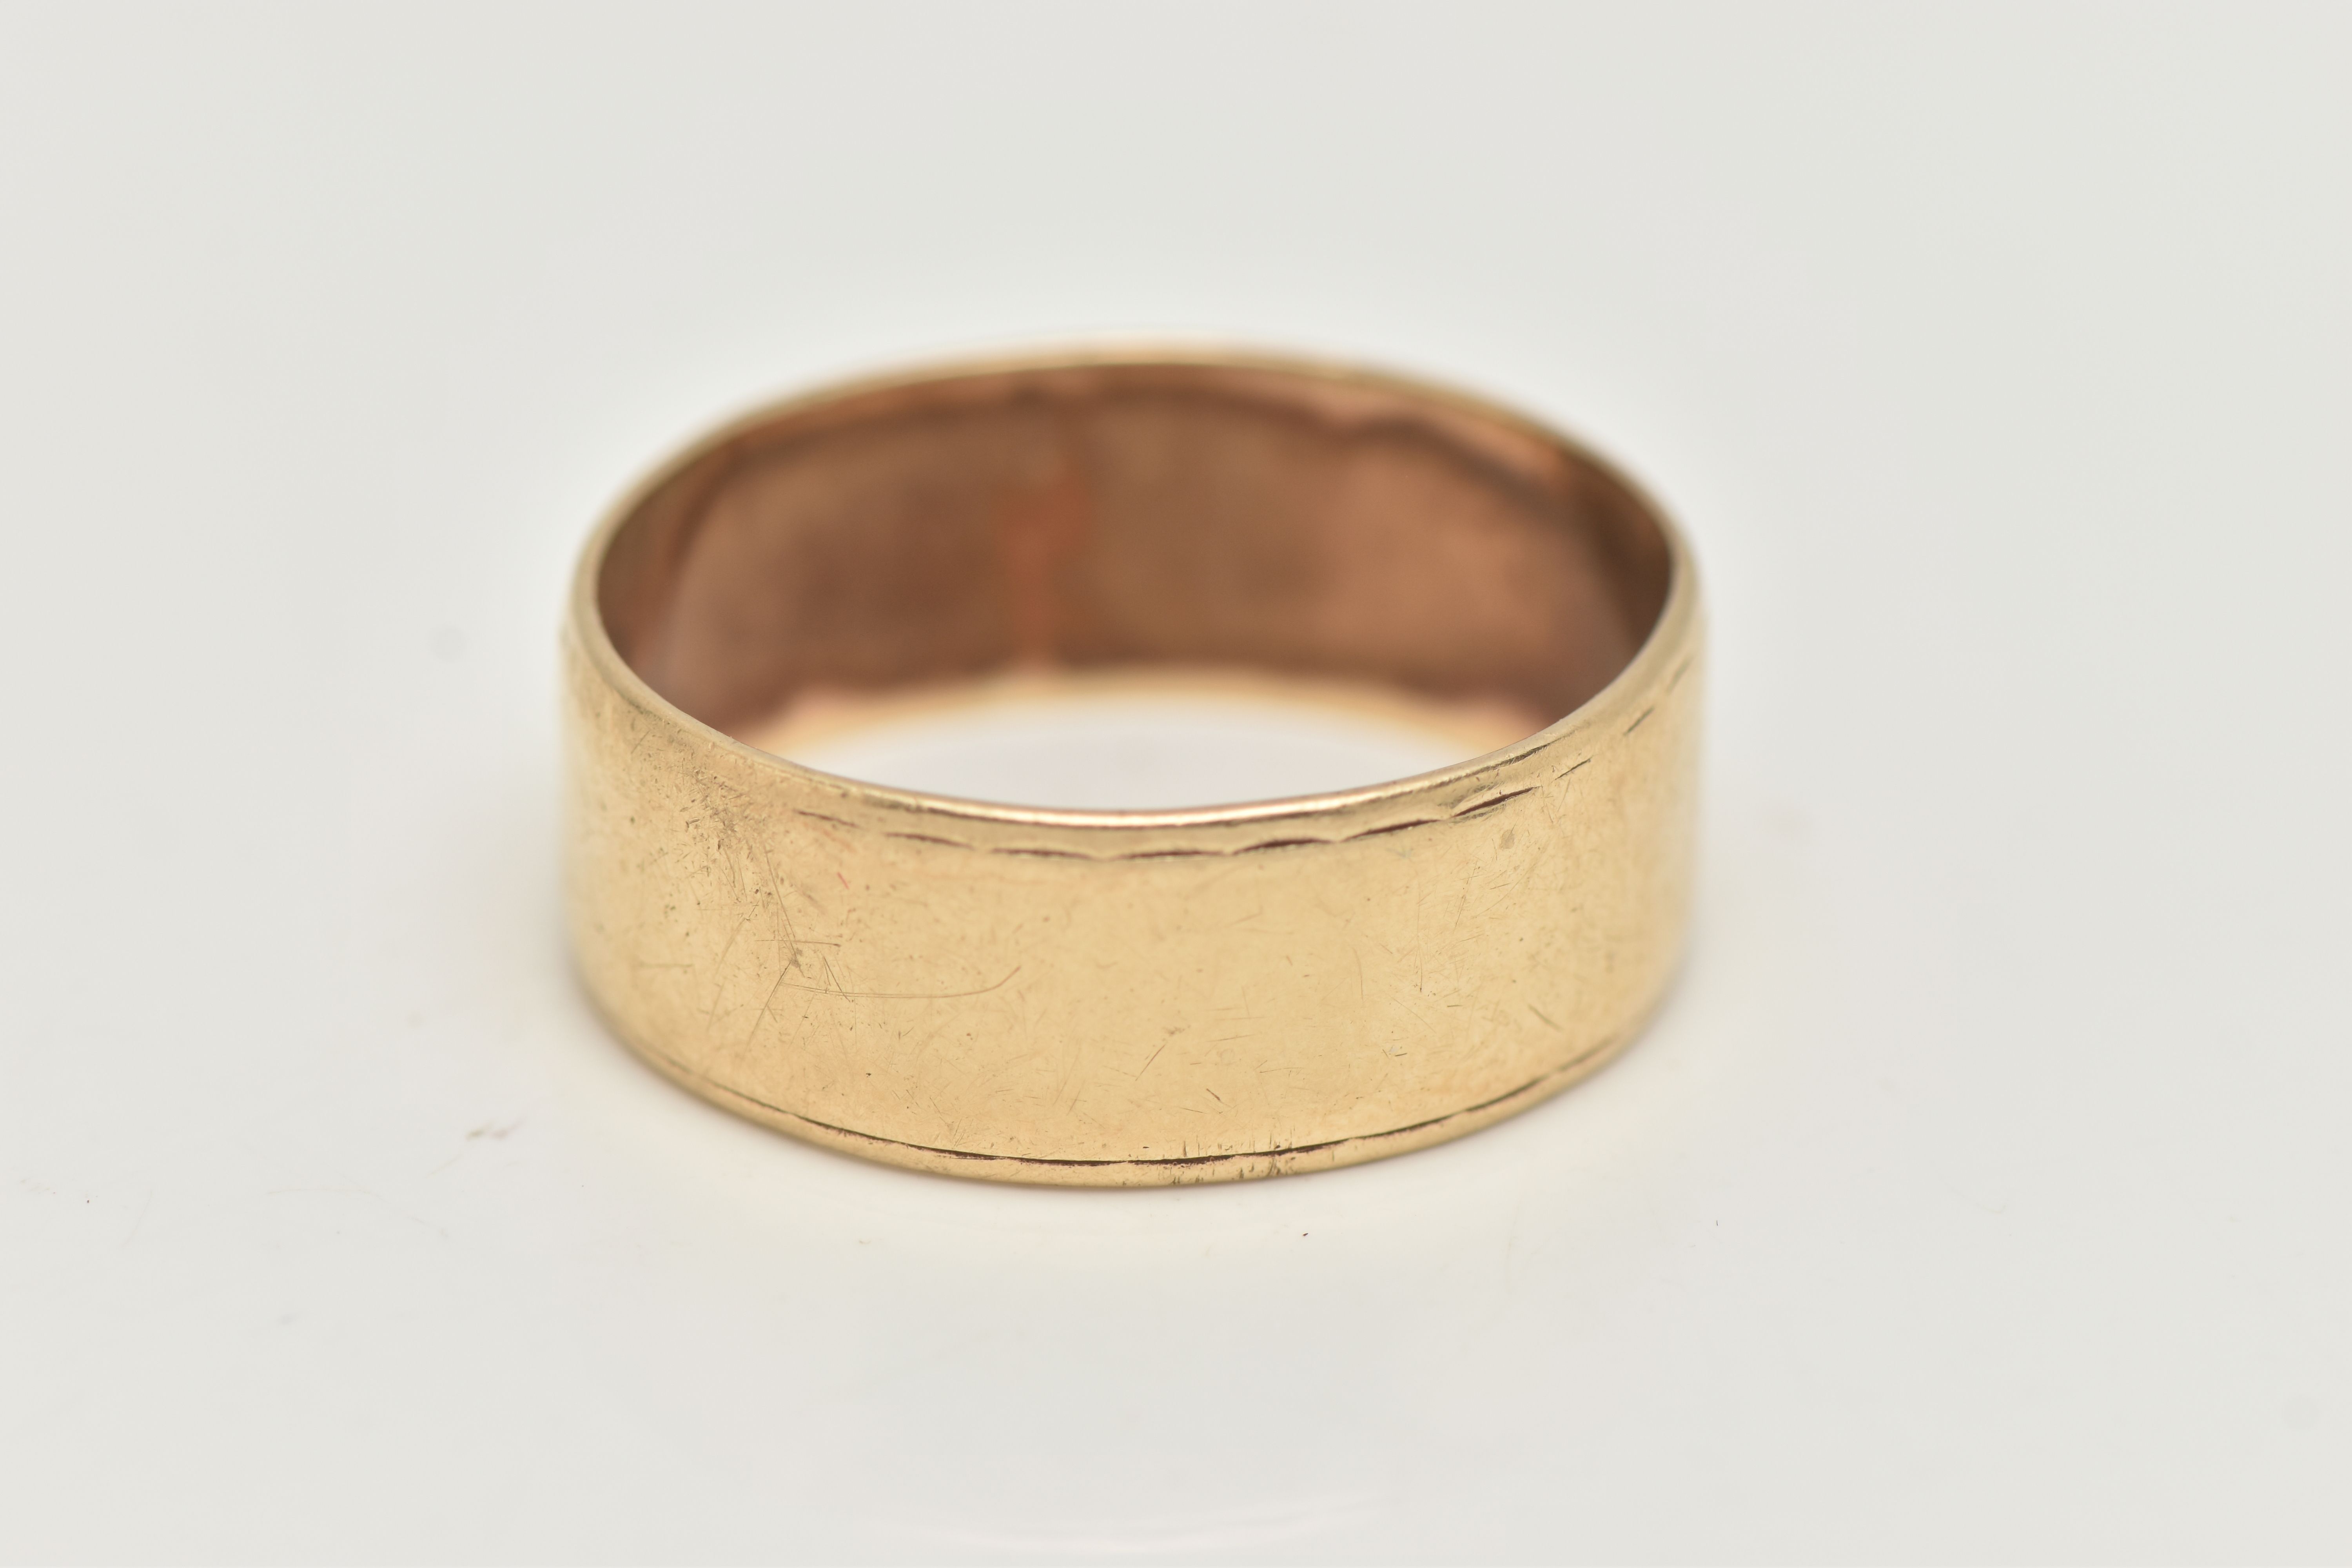 A 9CT GOLD WIDE POLISHED BAND, approximate band width 8.7mm, hallmarked 9ct London, ring size W - Image 2 of 2